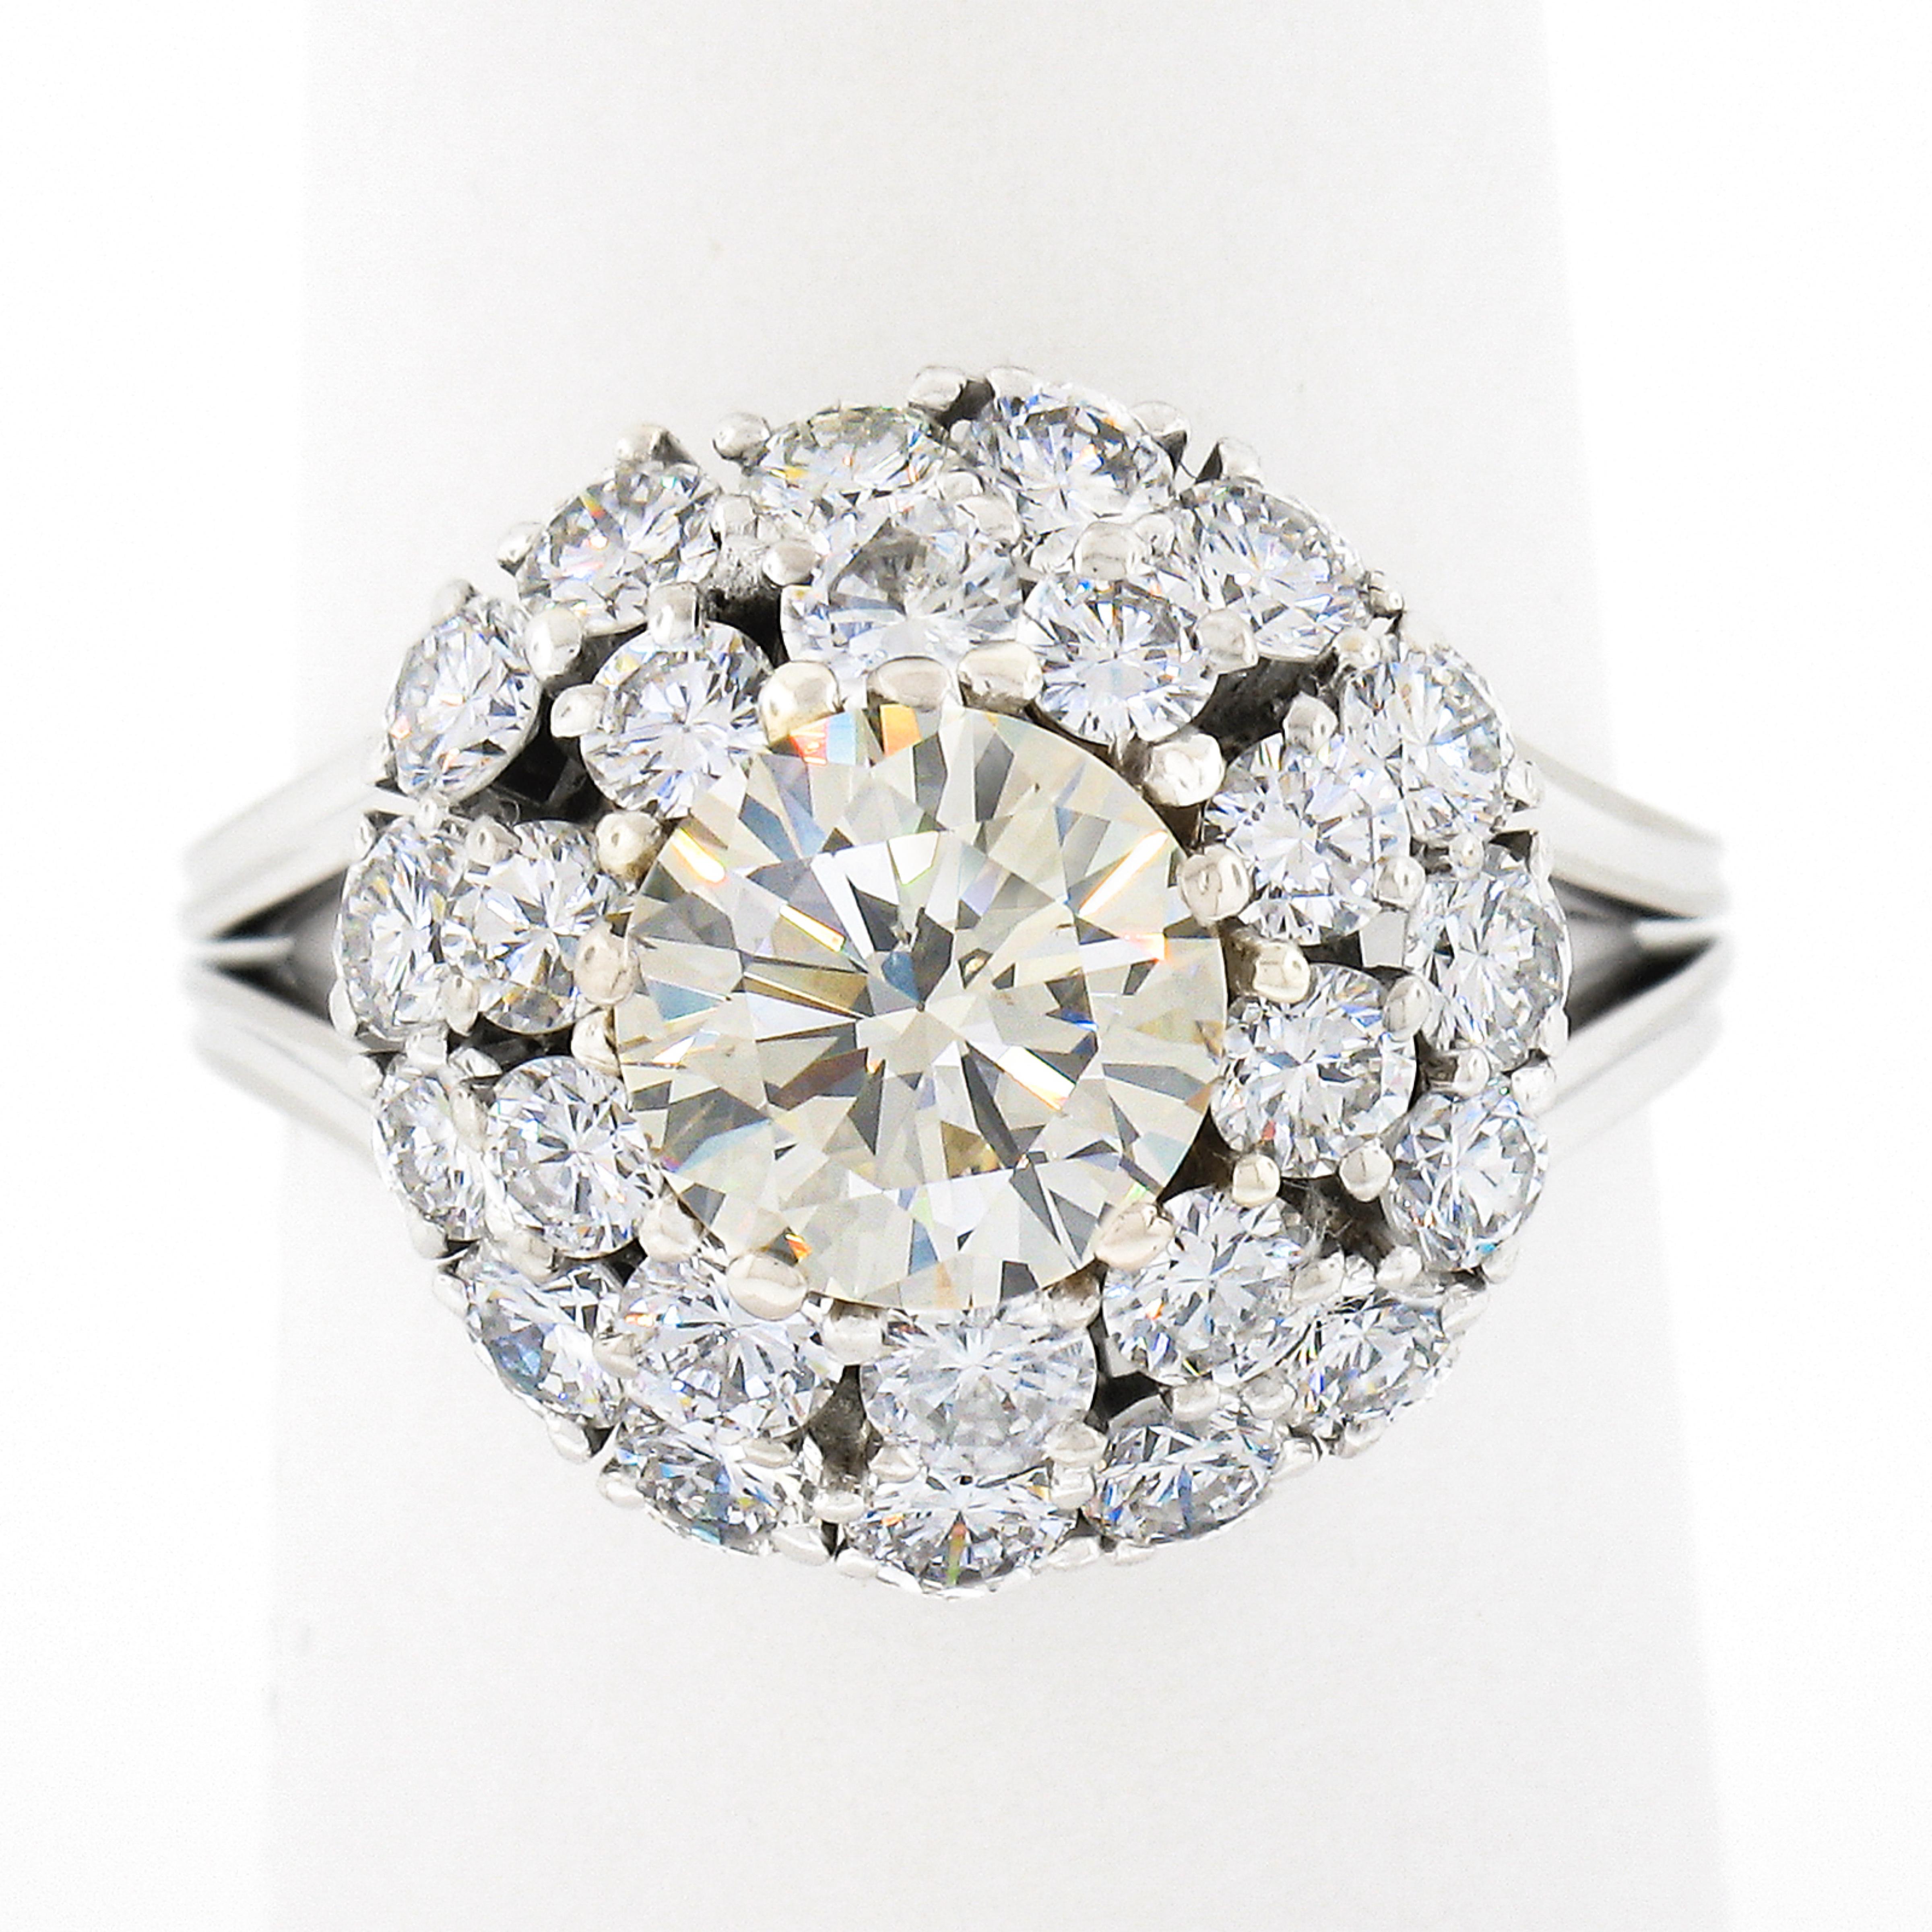 This truly breathtaking and very well made vintage diamond engagement or cocktail ring that was crafted from solid 18k white gold. It features a stunning light yellow diamond neatly prong set at its center and further surrounded by a double, tiered,